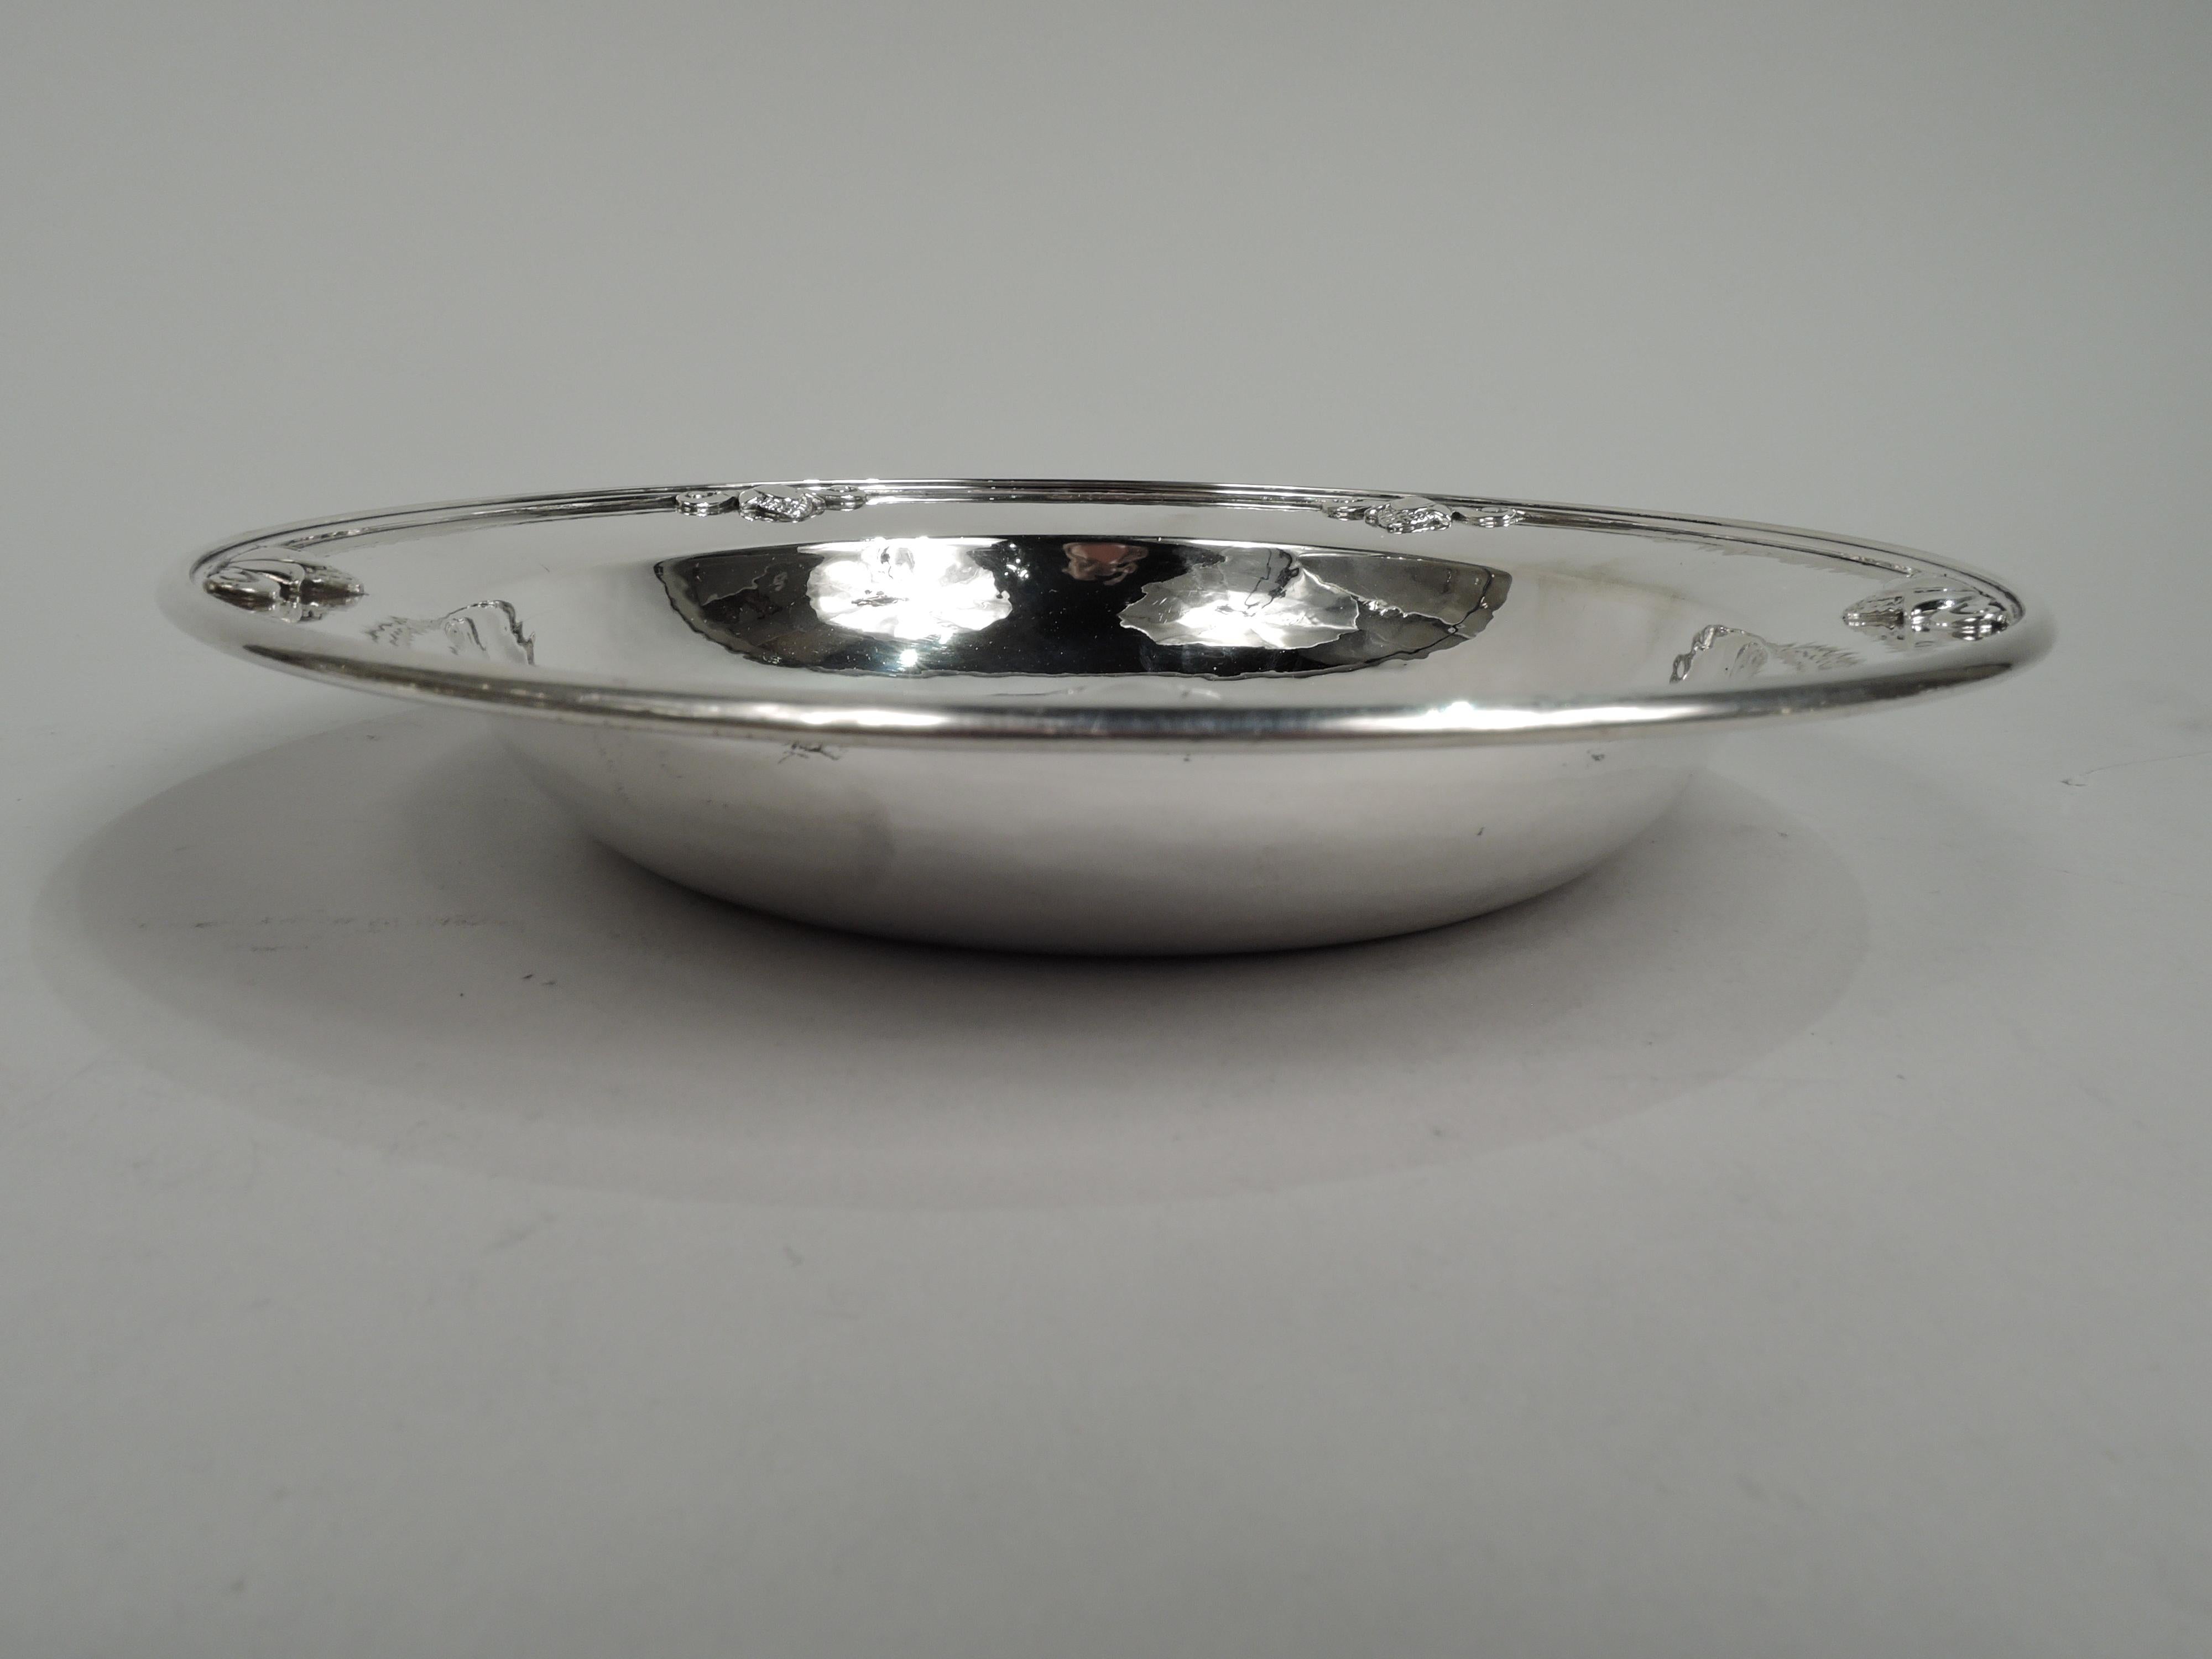 Acorn sterling silver bowl. Made by Georg Jensen in Copenhagen. Round well, curved and tapering sides, and wide hand-hammered shoulder applied with stylized acorns. Fully marked including maker’s stamp (1945-77) and no. 642. Weight: 7 troy ounces.